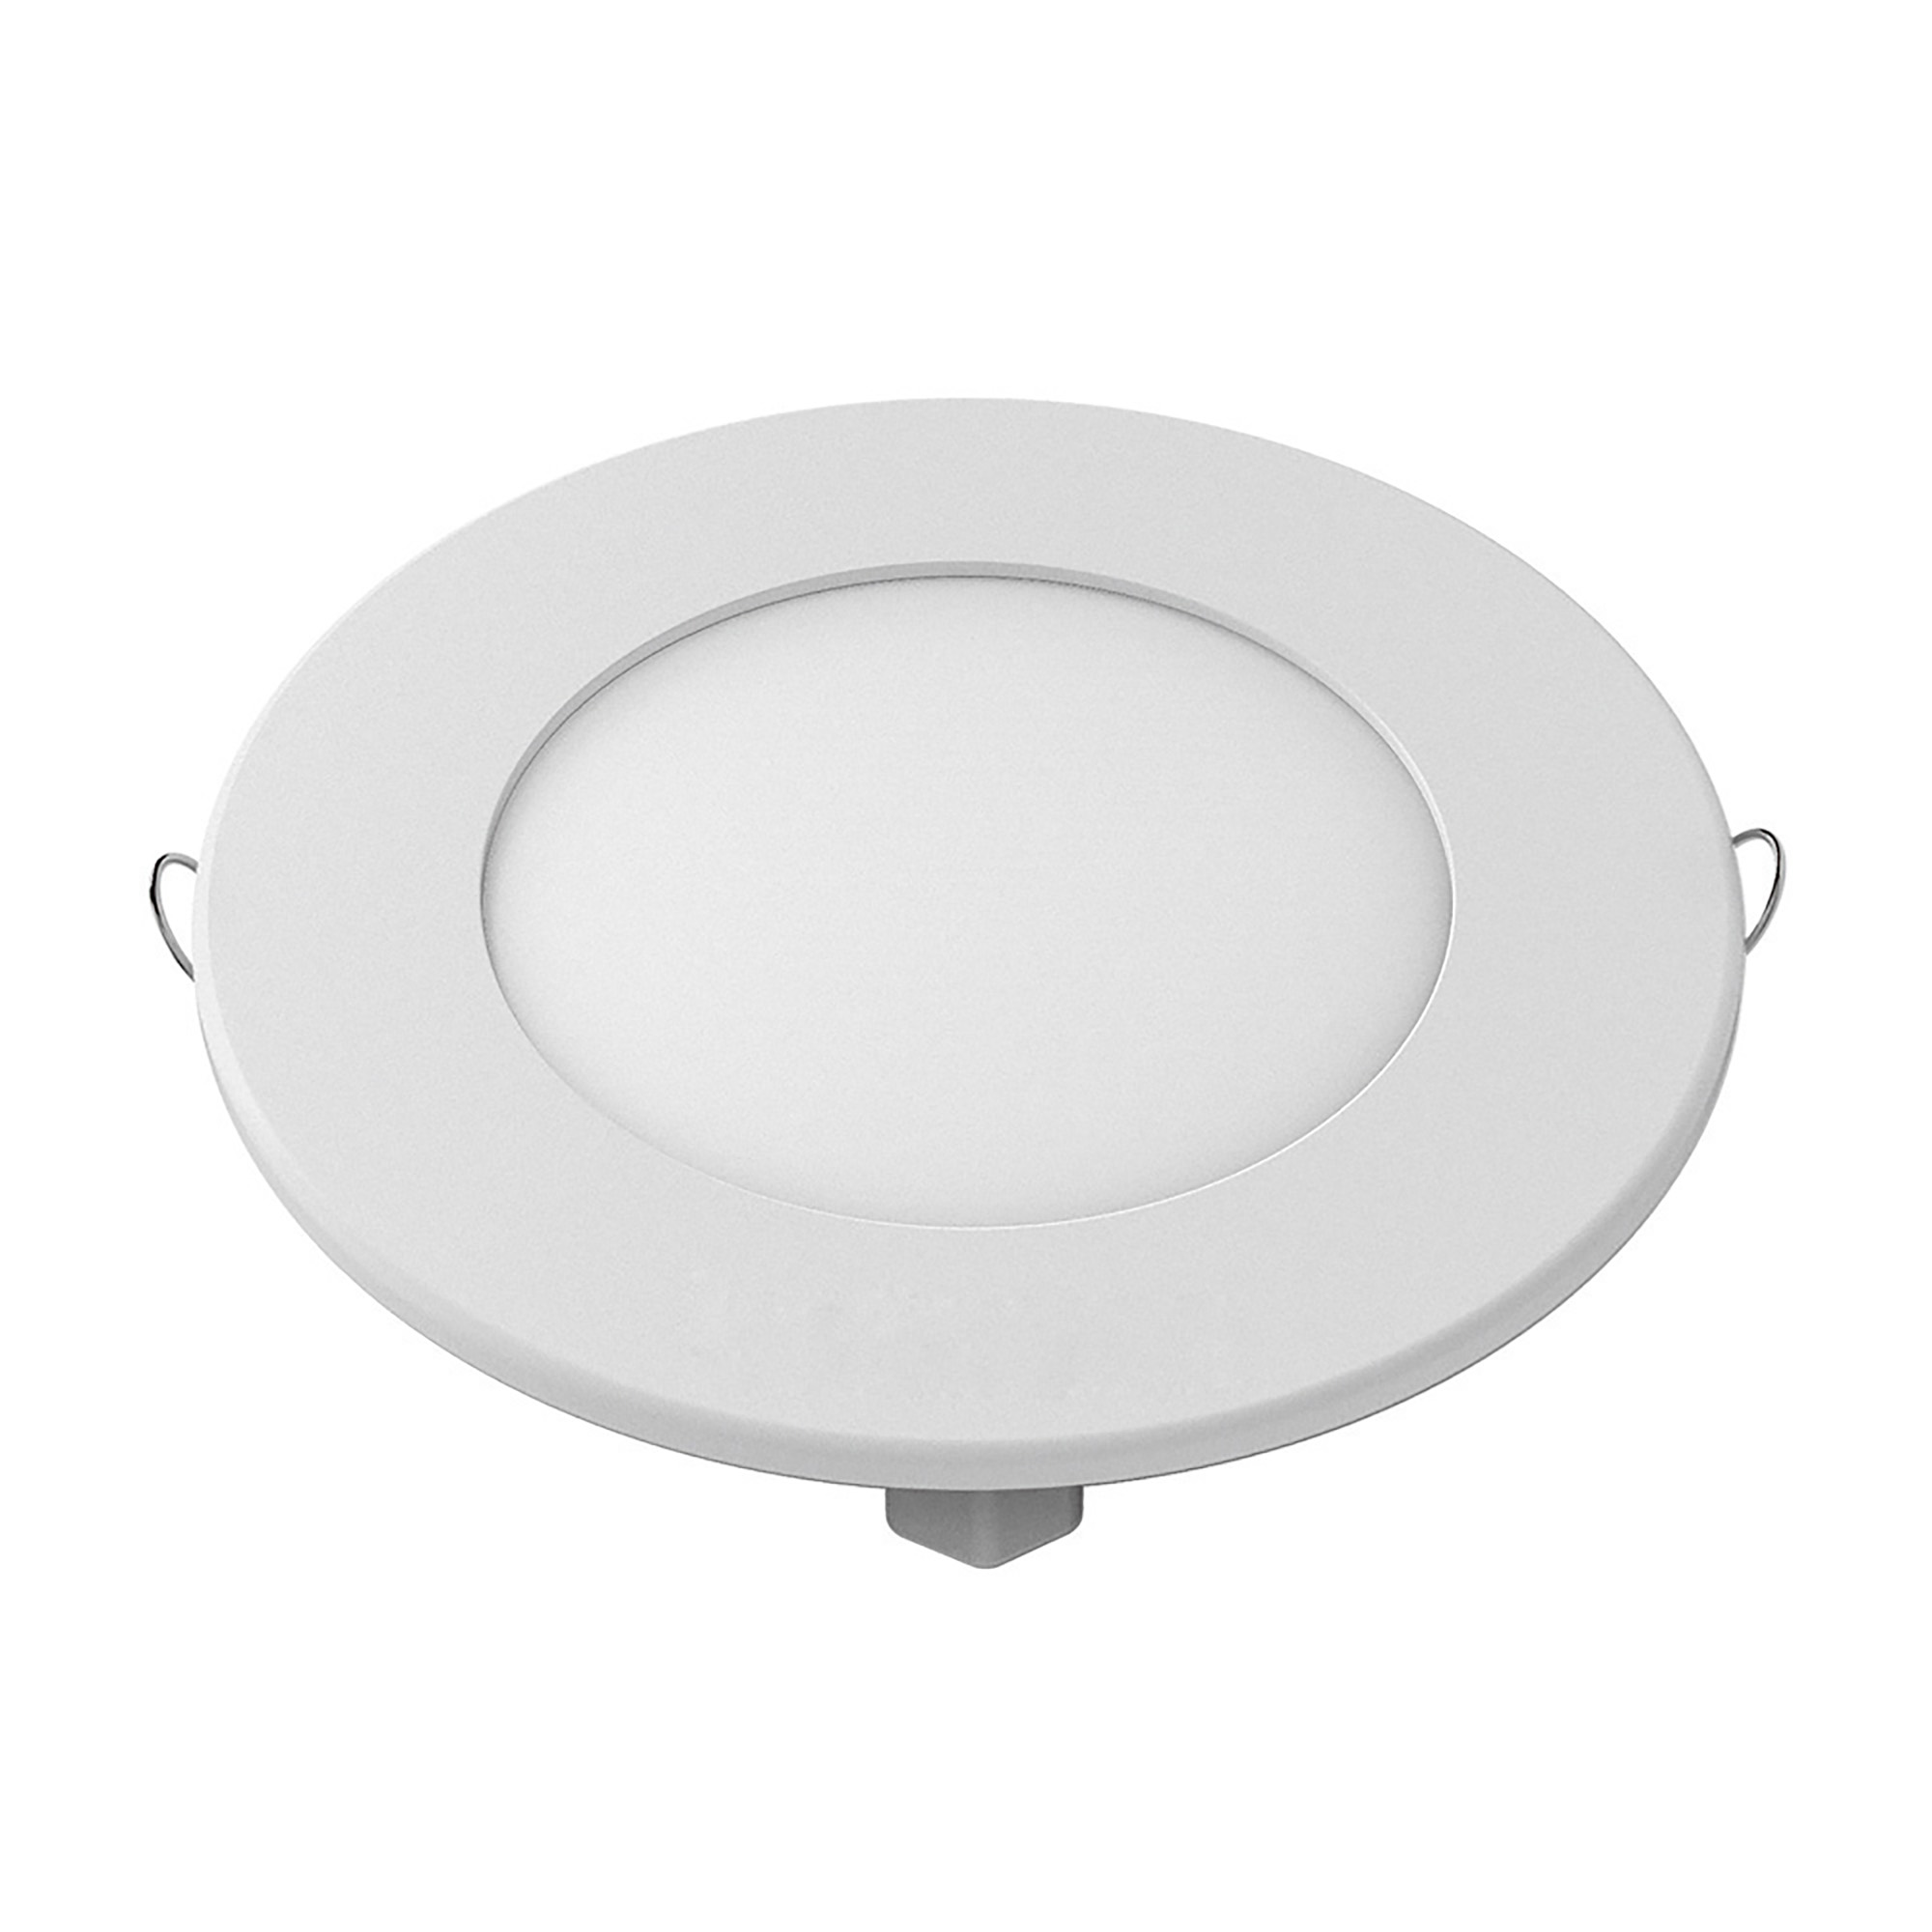 Intego Ultra-slim Recessed Ceiling Luminaires Techtouch Round Recess Ceiling